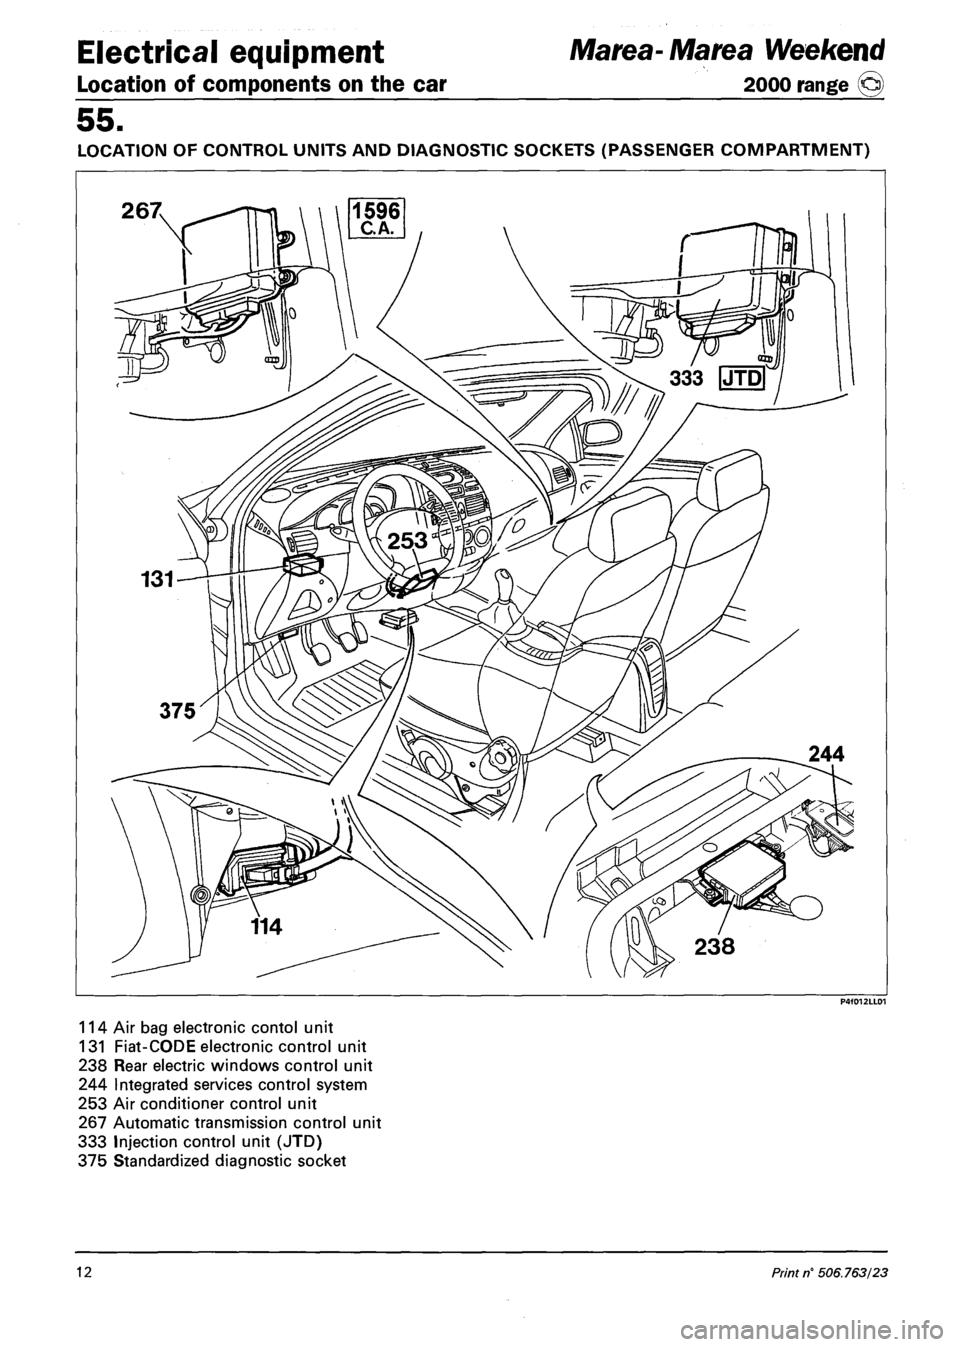 FIAT MAREA 2001 1.G User Guide Electrical equipment Marea-Marea Weekend 
Location of components on the car 2000 range © 
55. 
LOCATION OF CONTROL UNITS AND DIAGNOSTIC SOCKETS (PASSENGER COMPARTMENT) 
P4f012LL01 
114 Air bag electr